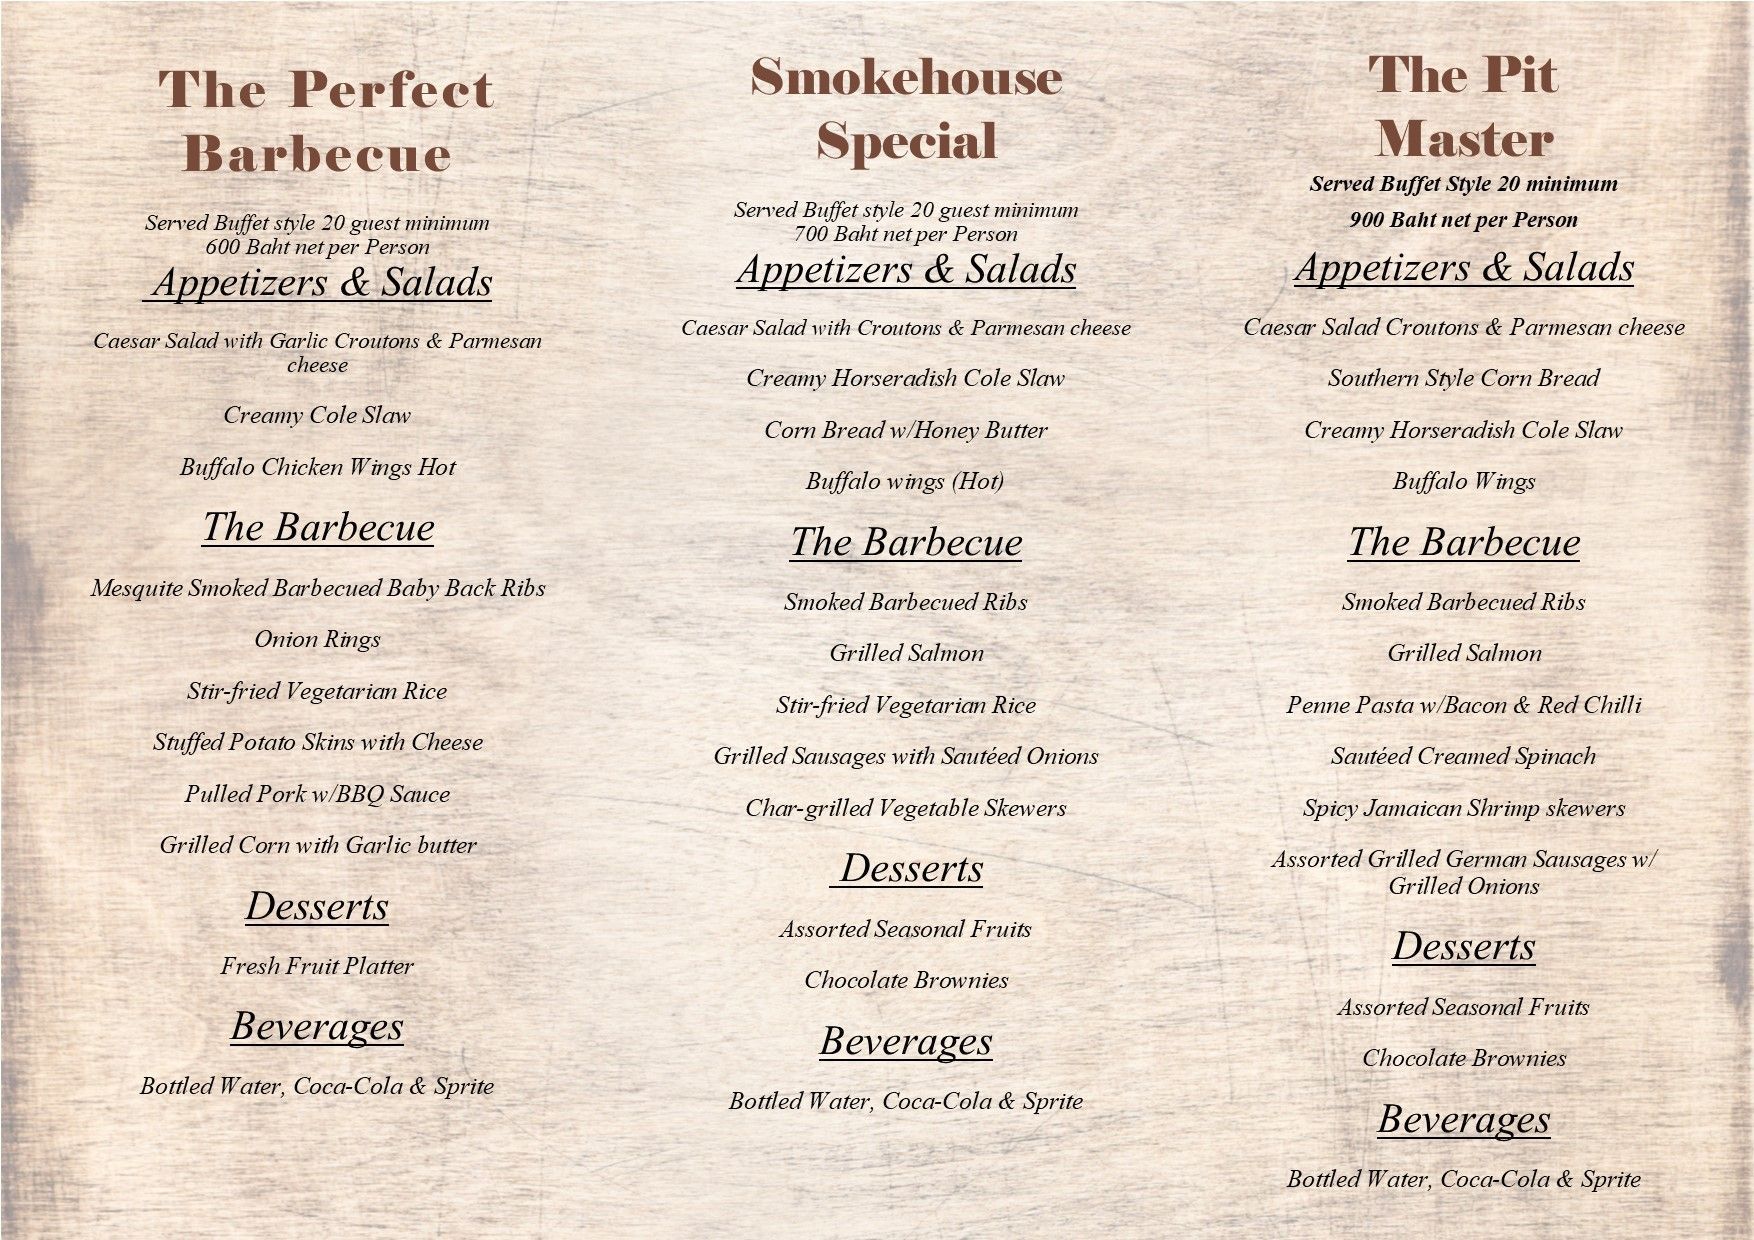 A menu for a restaurant called the perfect barbecue